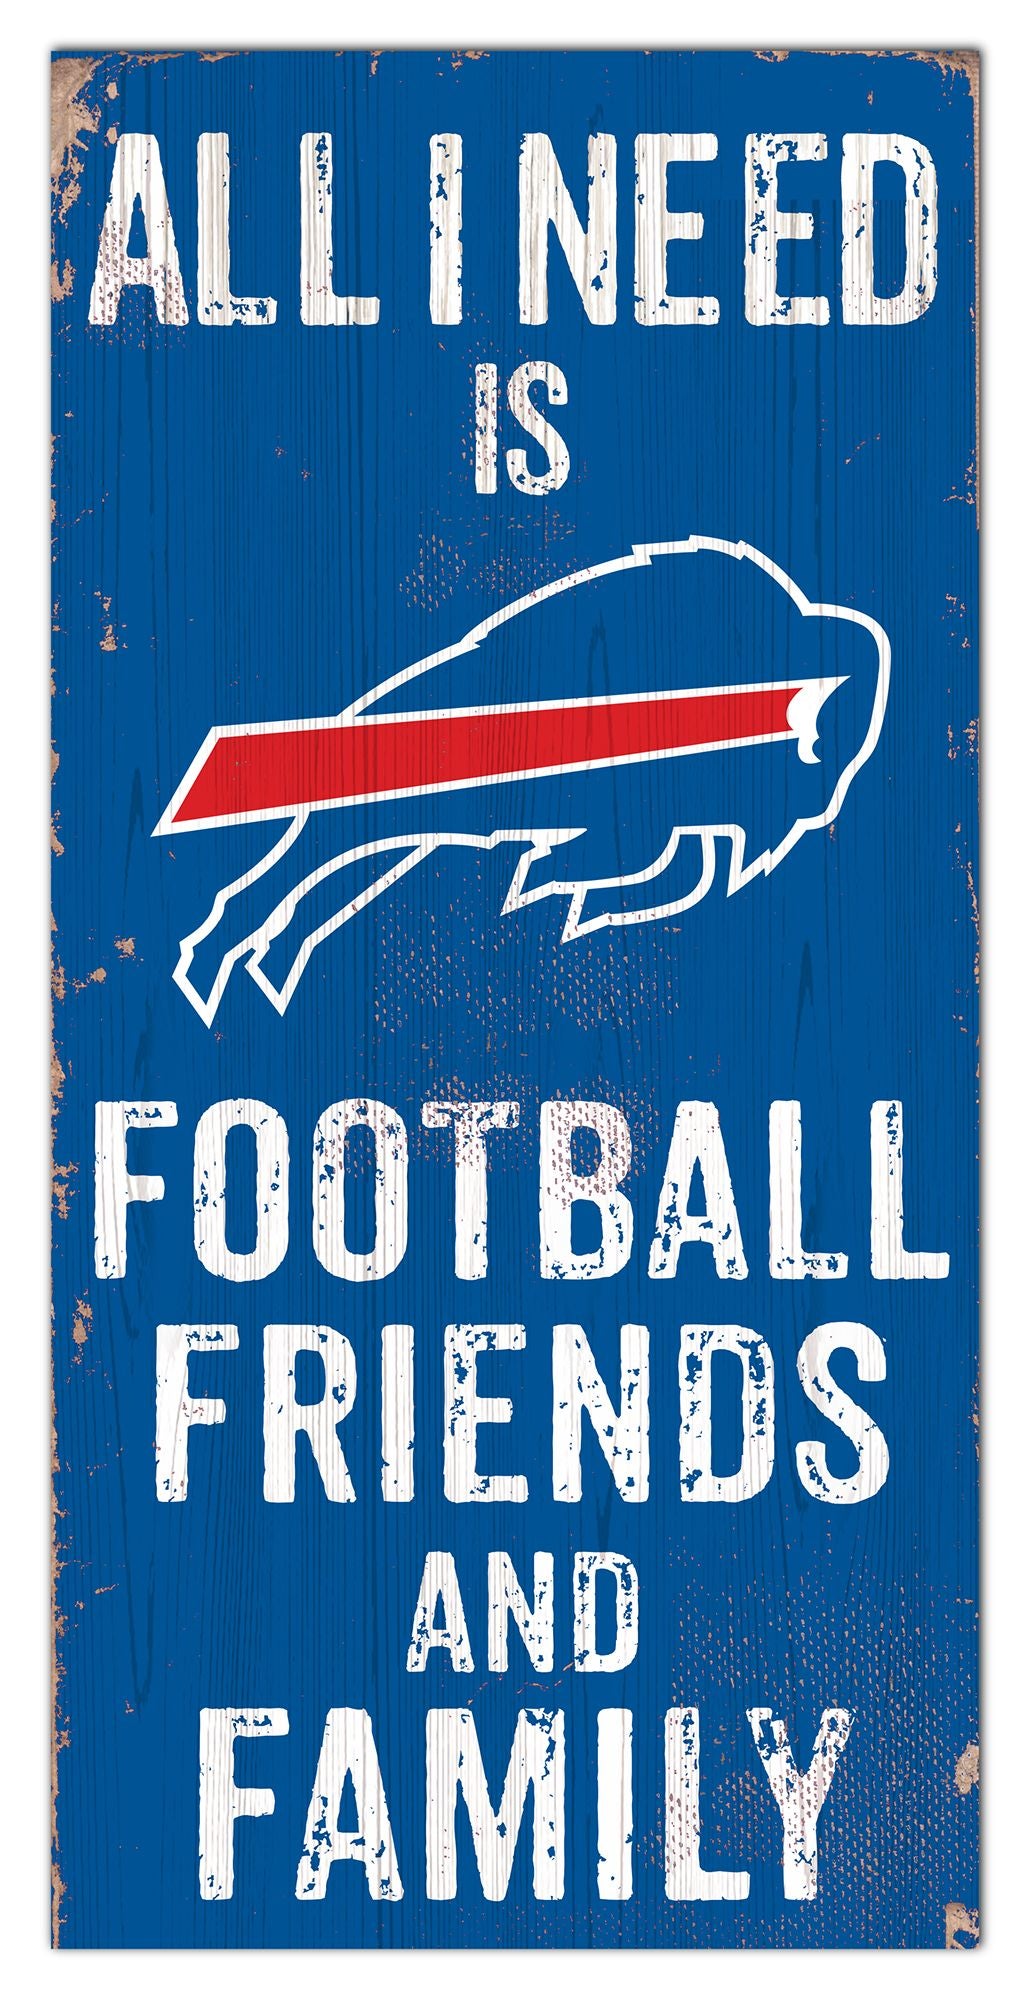 Buffalo Bills NFL sign: "Football, Family & Friends" theme. 6x12 inches, distressed MDF design, indoor use, officially licensed.